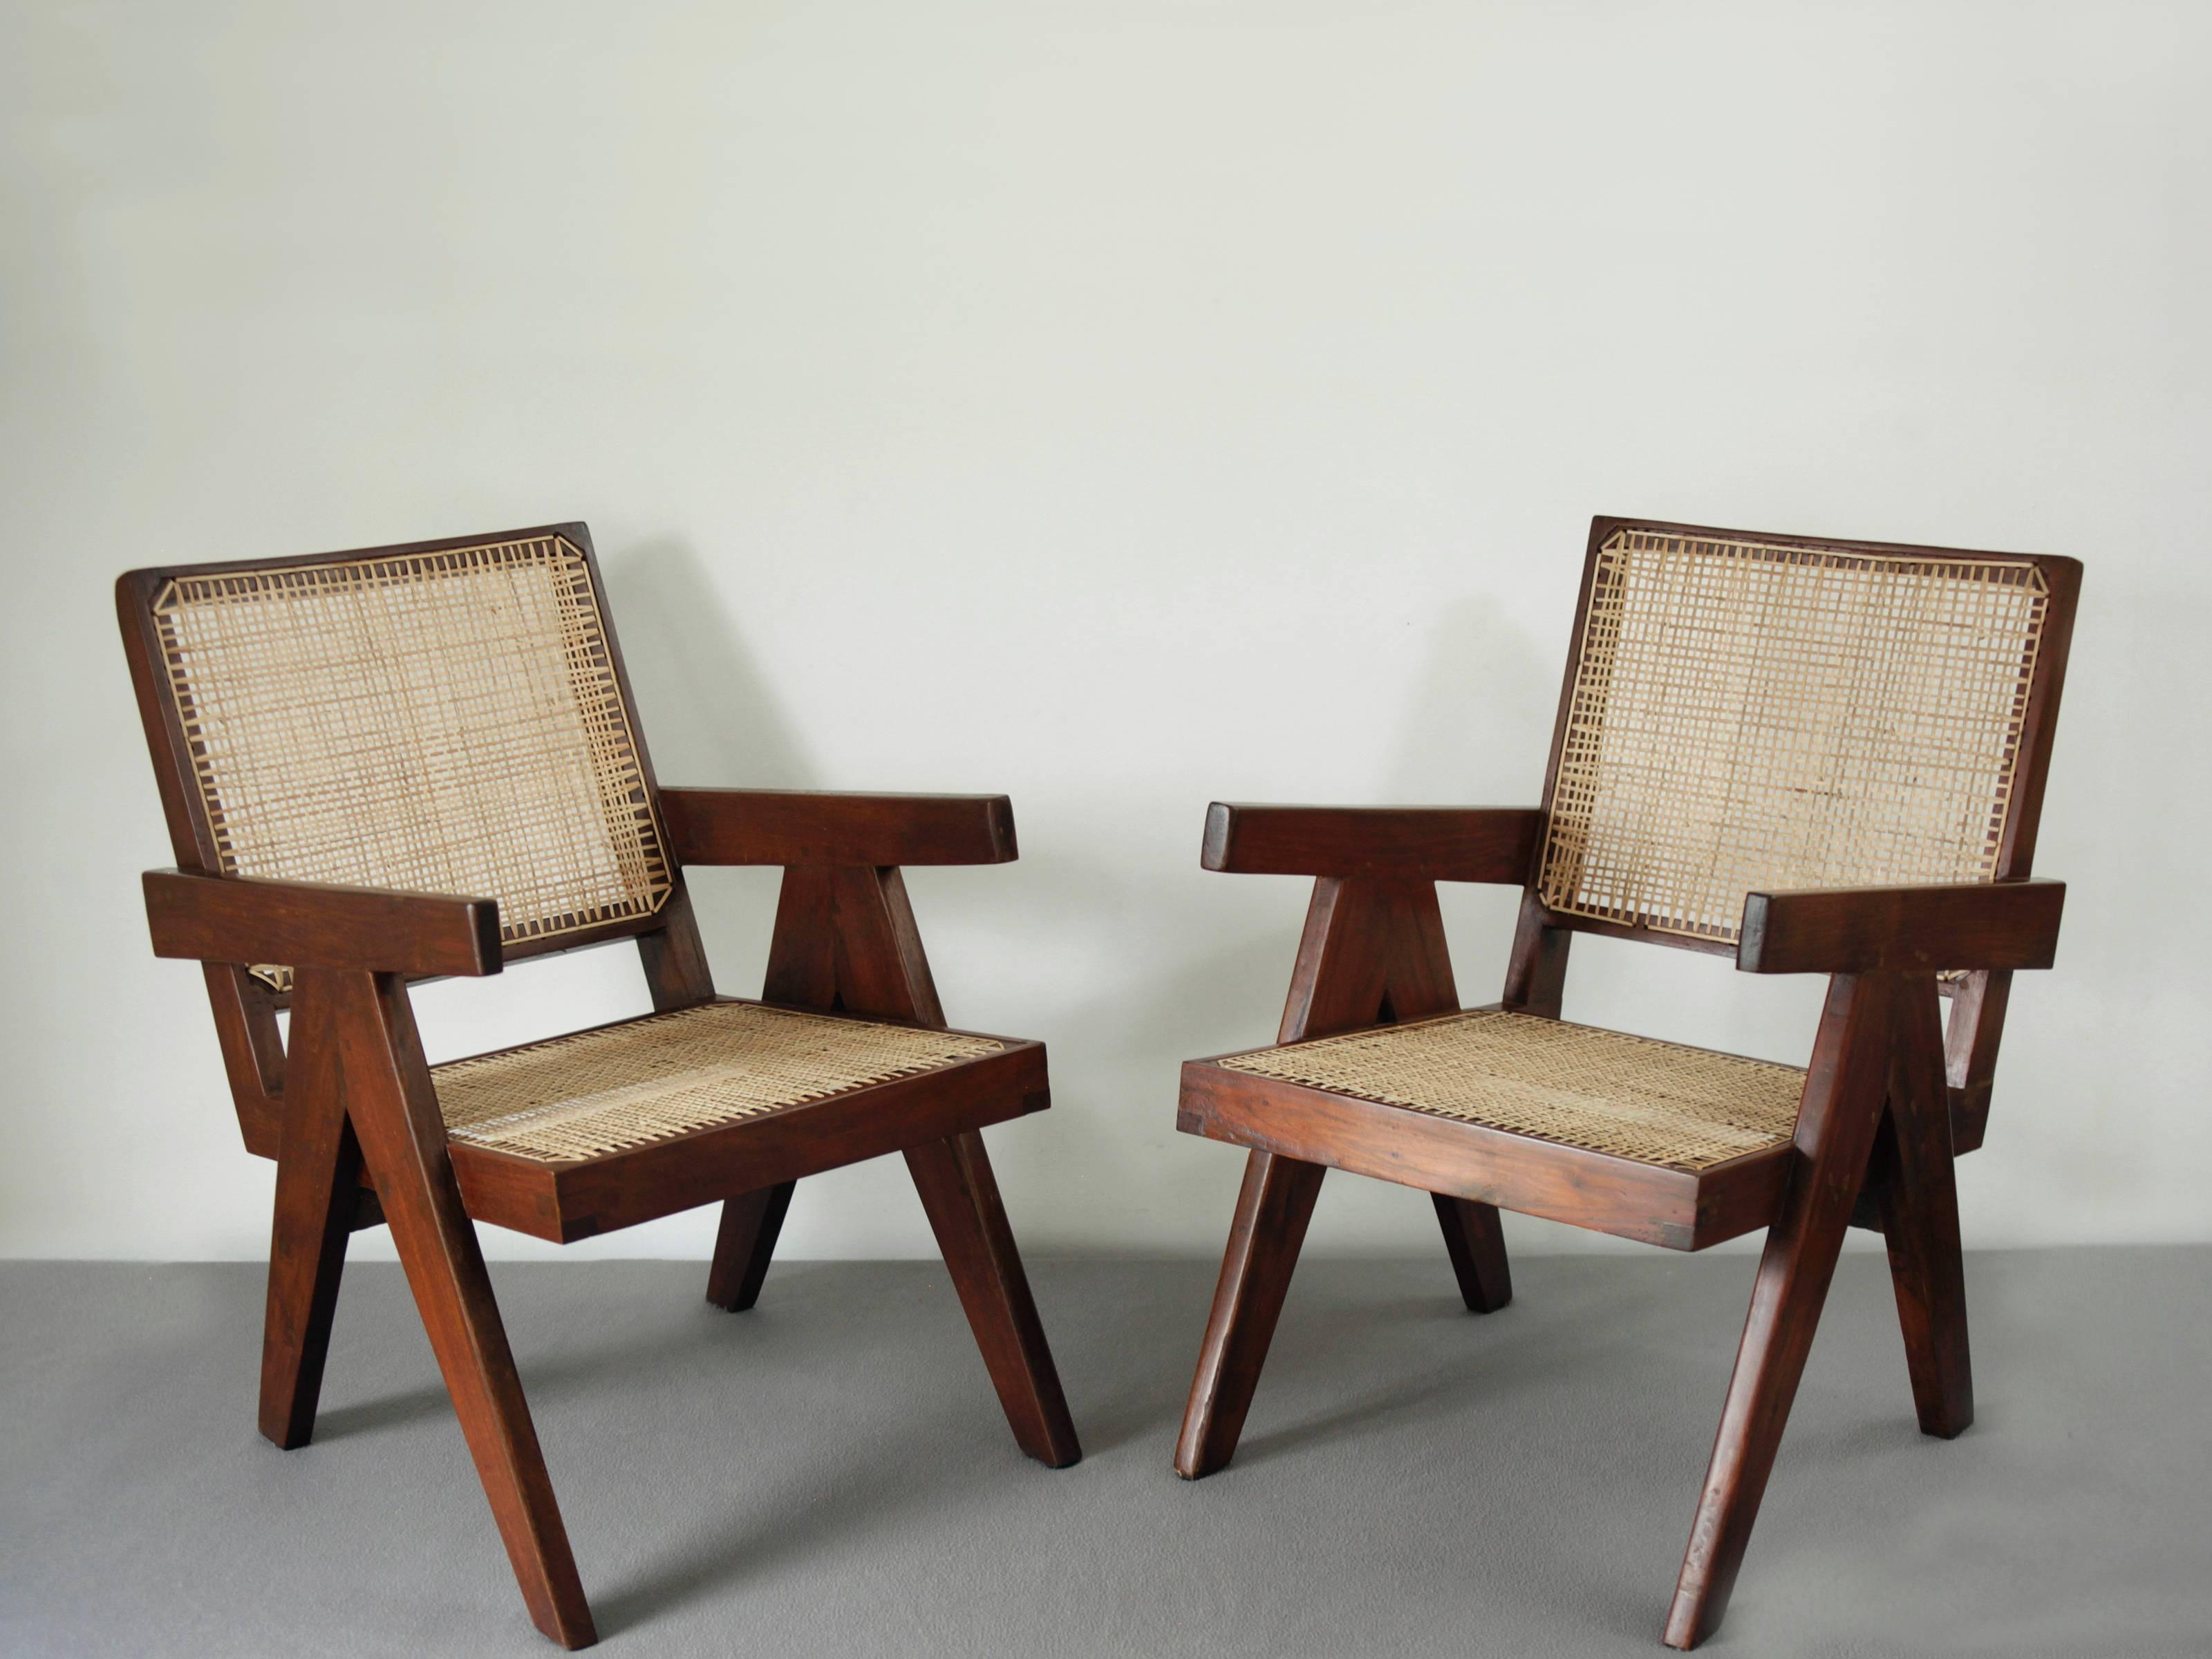 Pair of teak and cane Pierre Jeanneret lounge chairs from Chandigarh with full provenance.